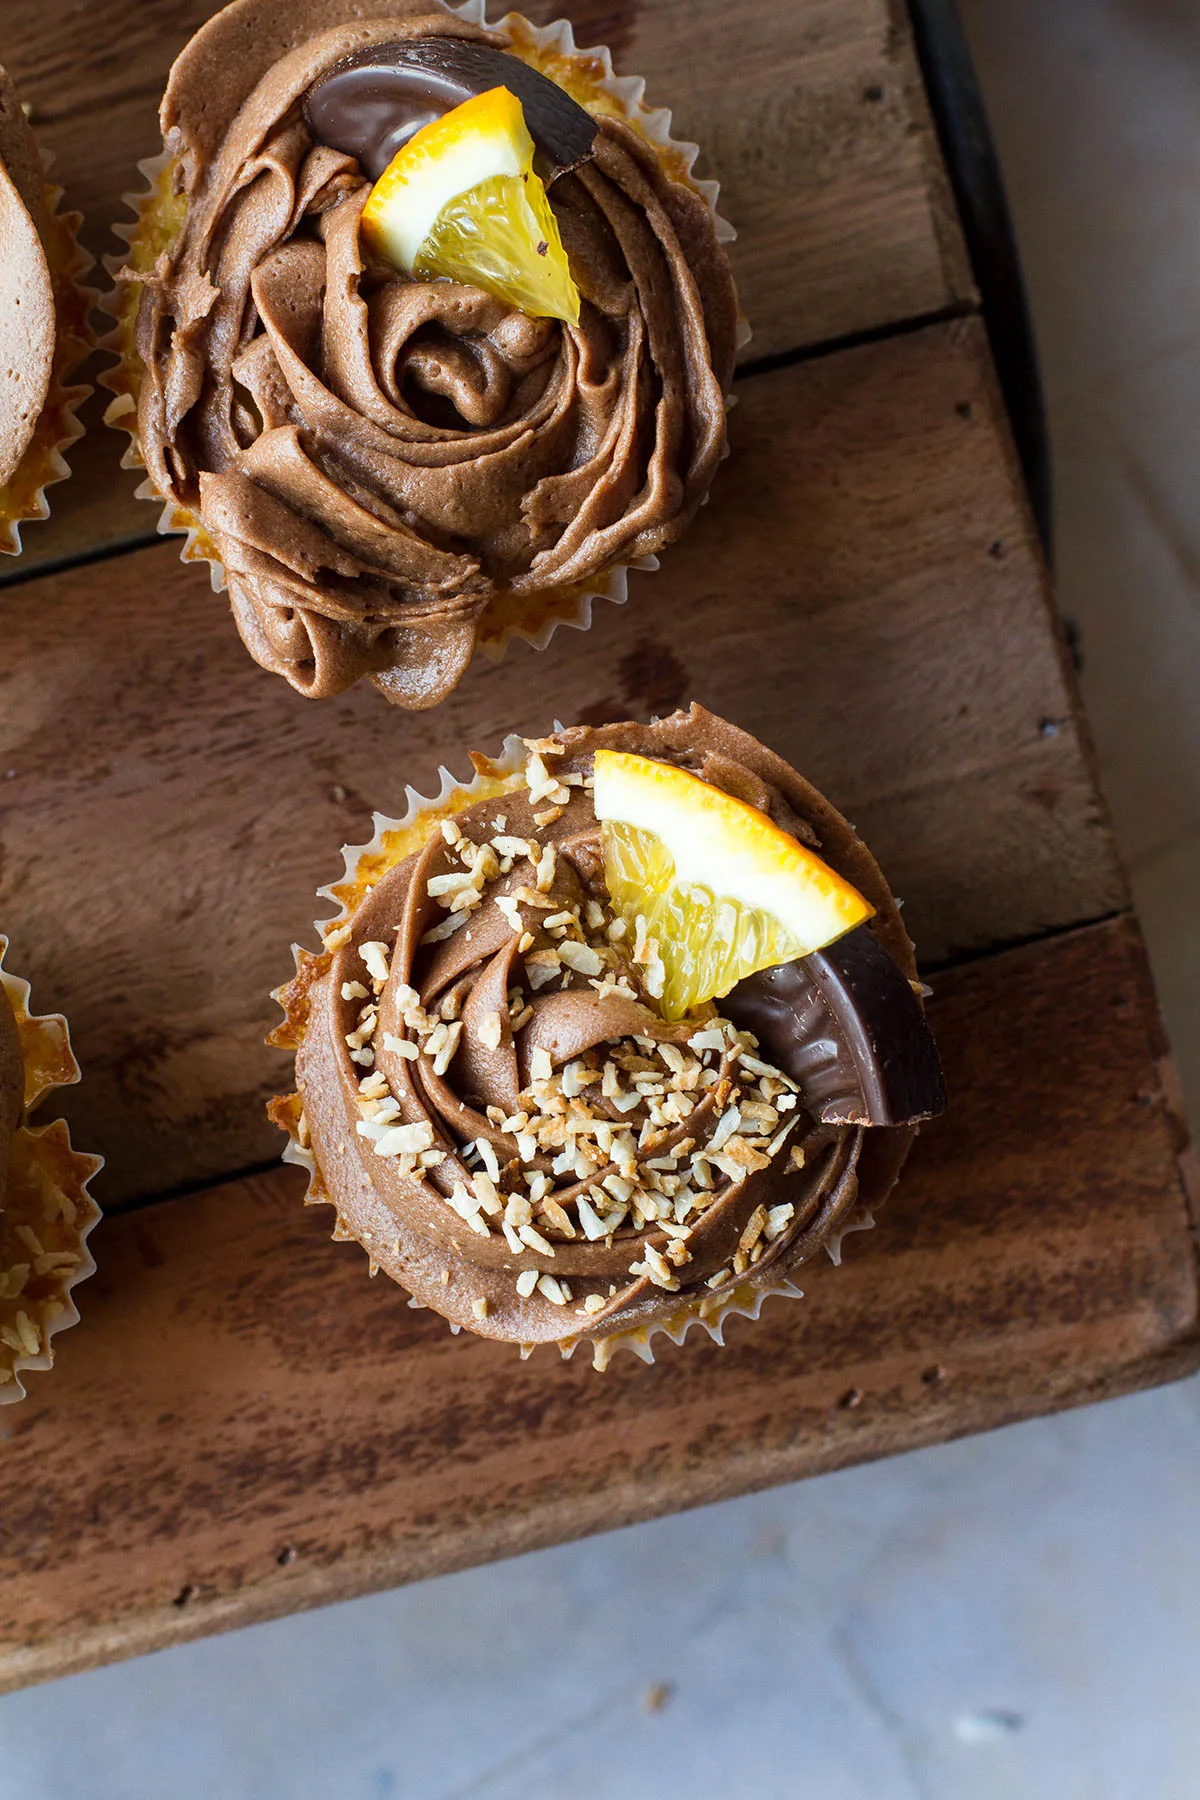 Flat-lay of a cupcake with chocolate buttercream, toasted coconut and an orange wedge.